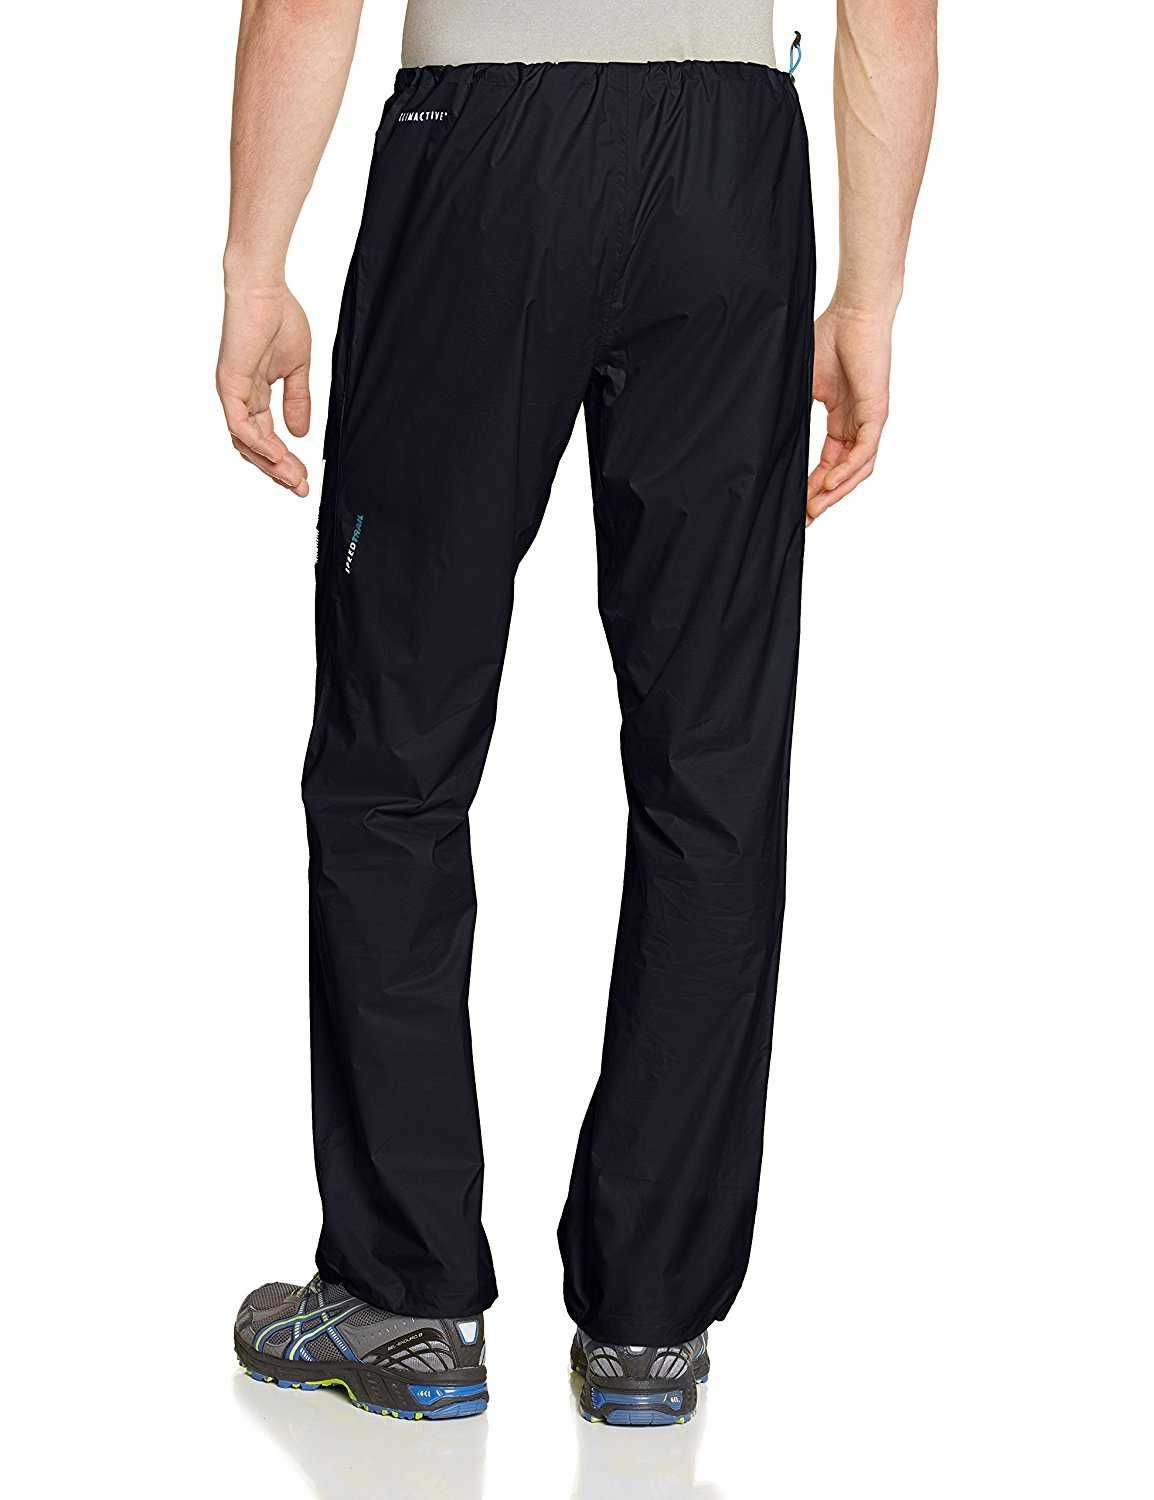 Speed Trail Pant